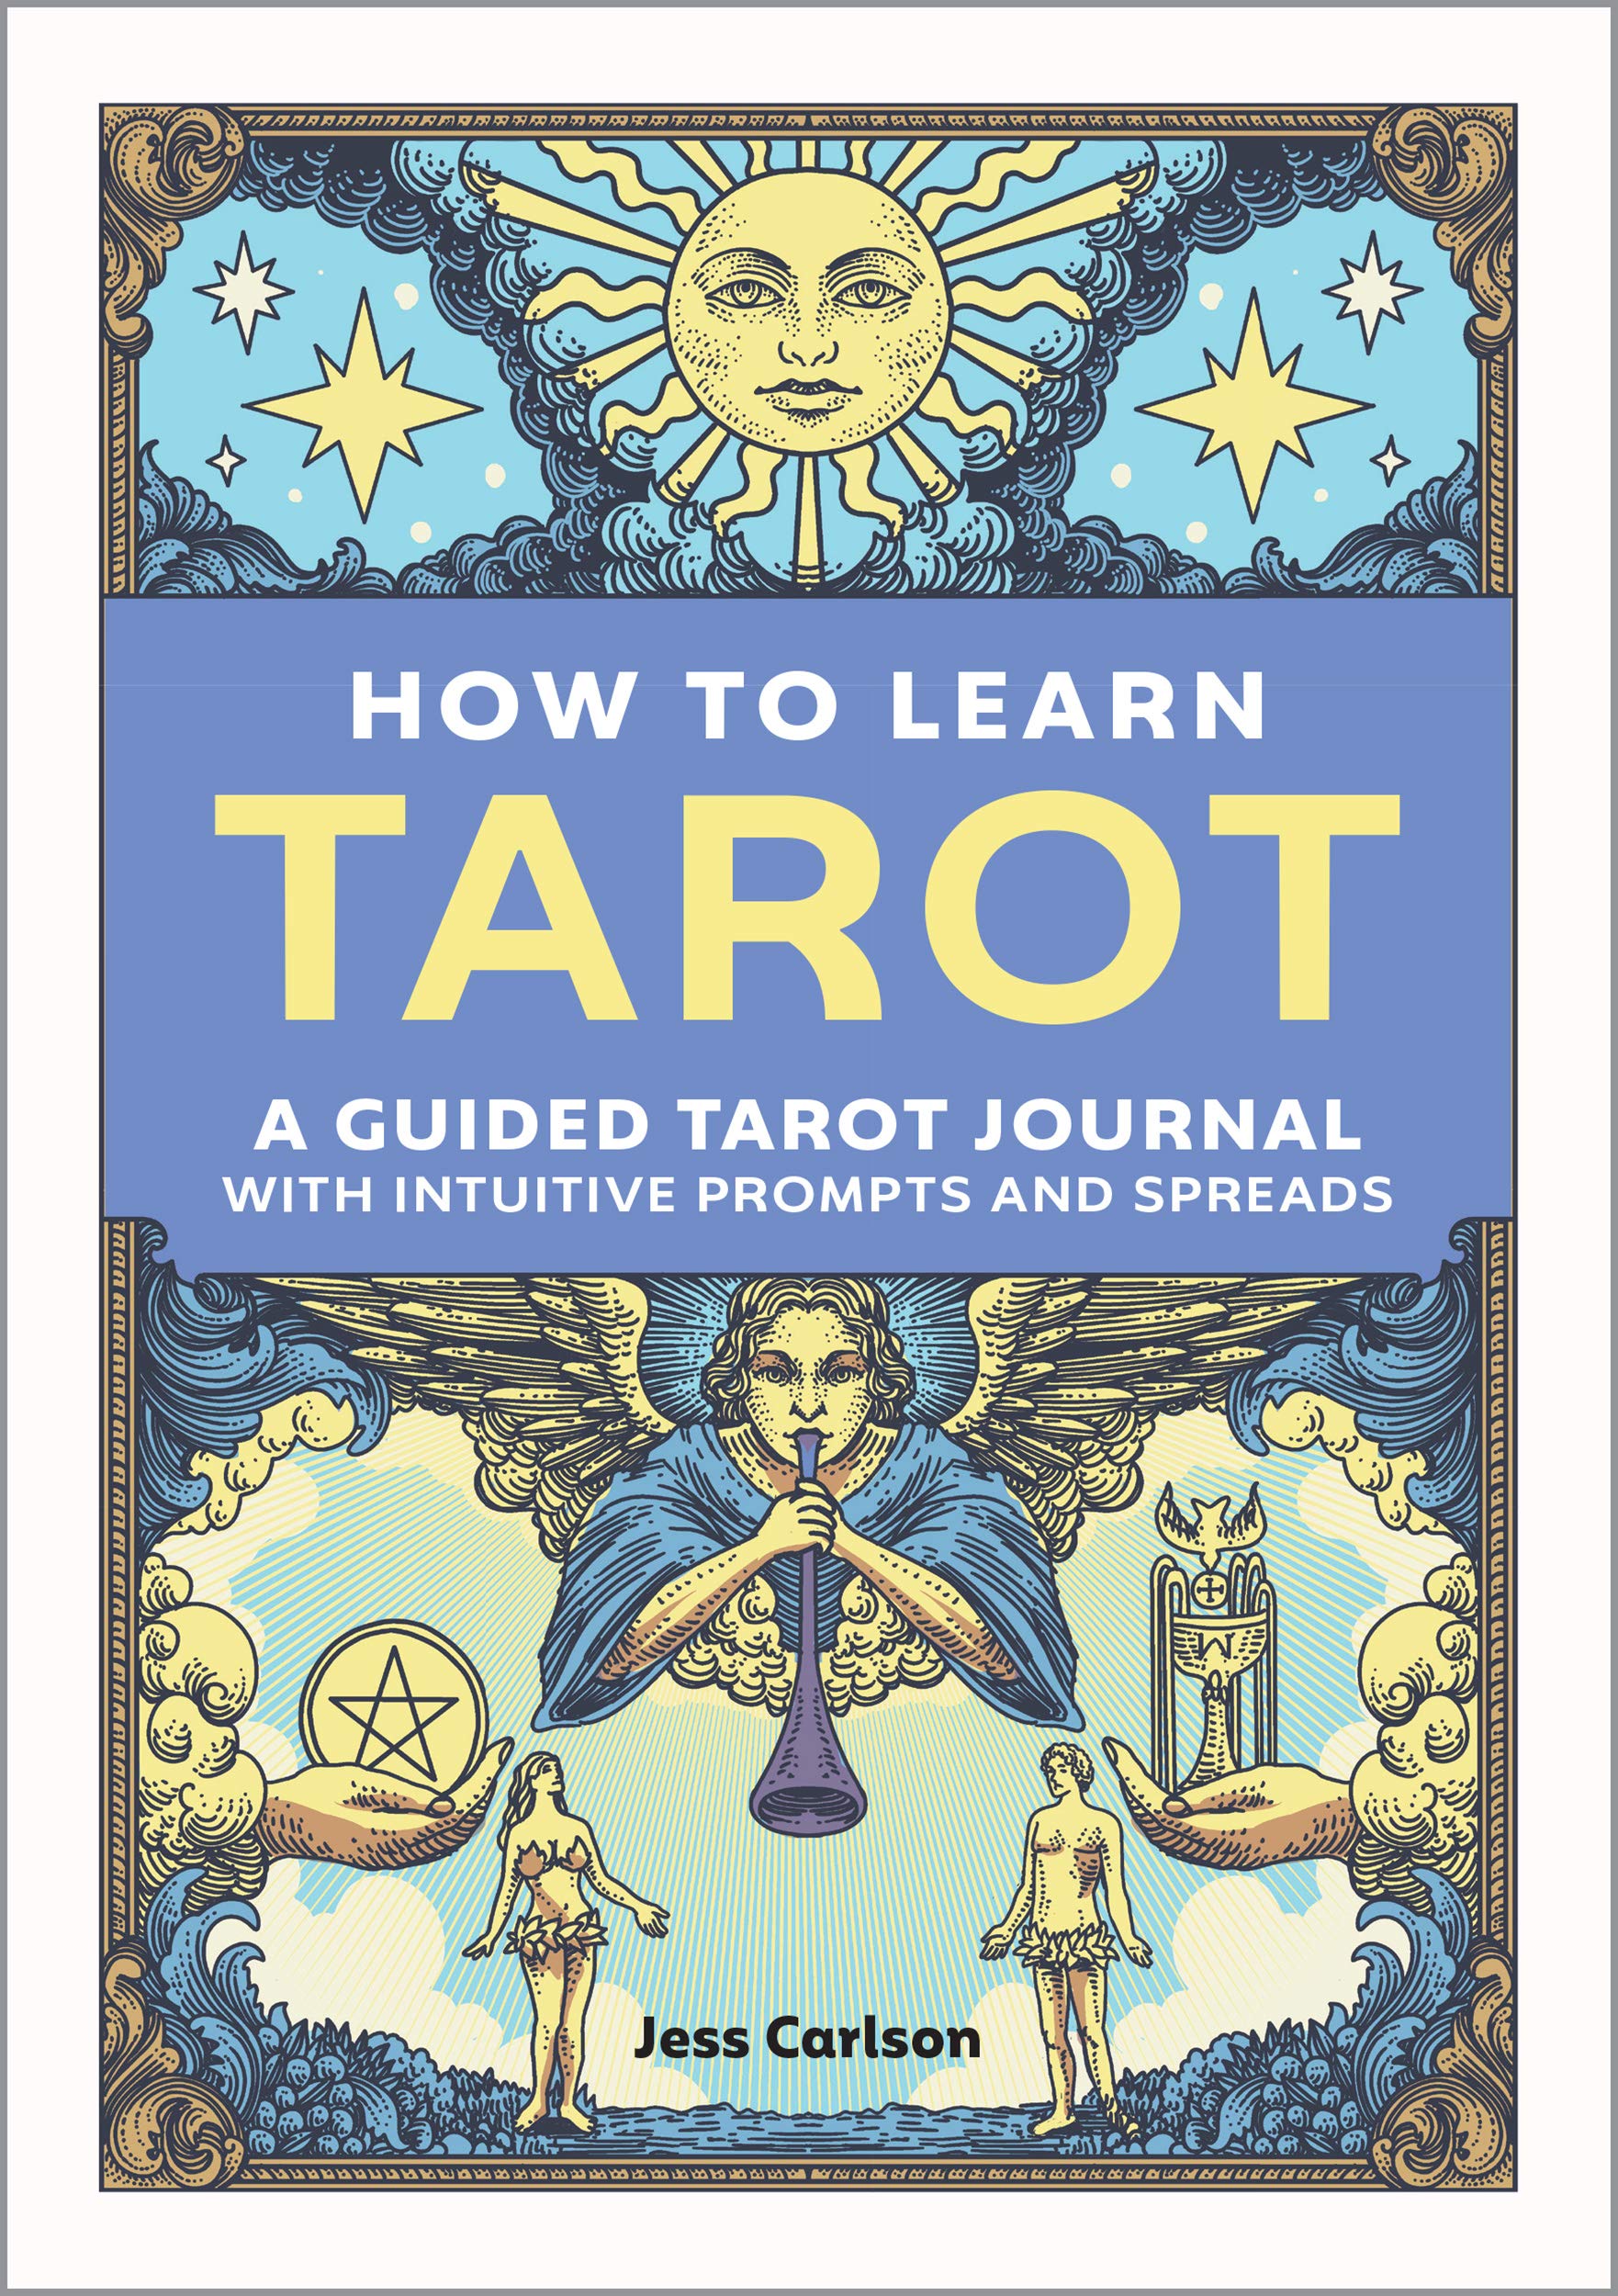 How to Learn A Guided Tarot Journal with Intuitive and Spreads trên Amazon Mỹ chính hãng 2023 |